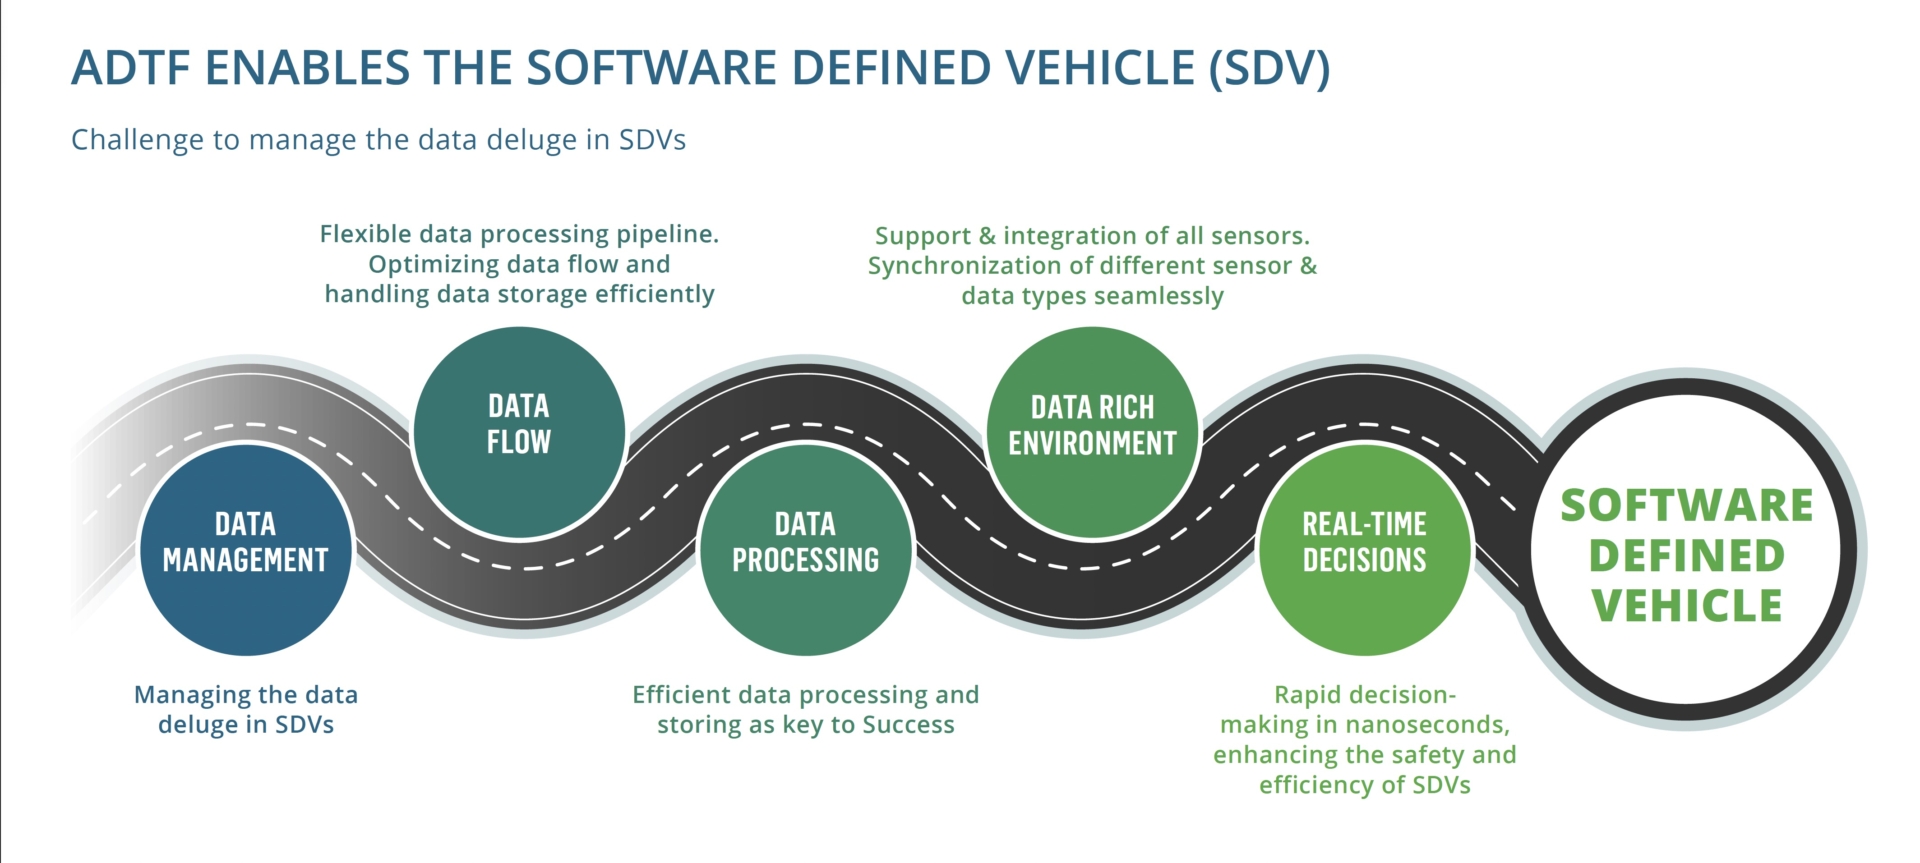 ADTF enables the software defined vehicle